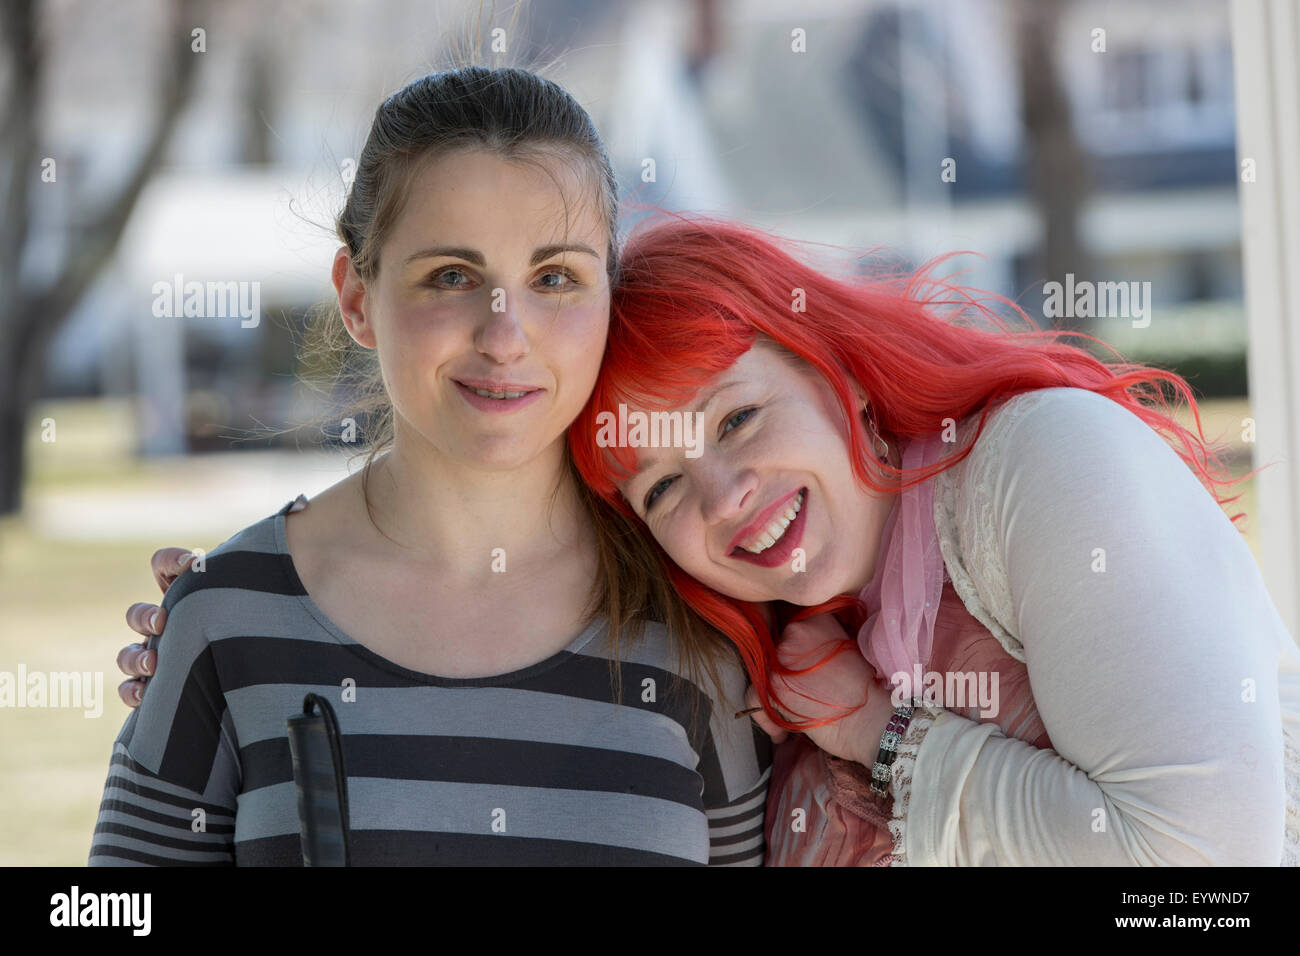 Two young women with visual impairments Stock Photo